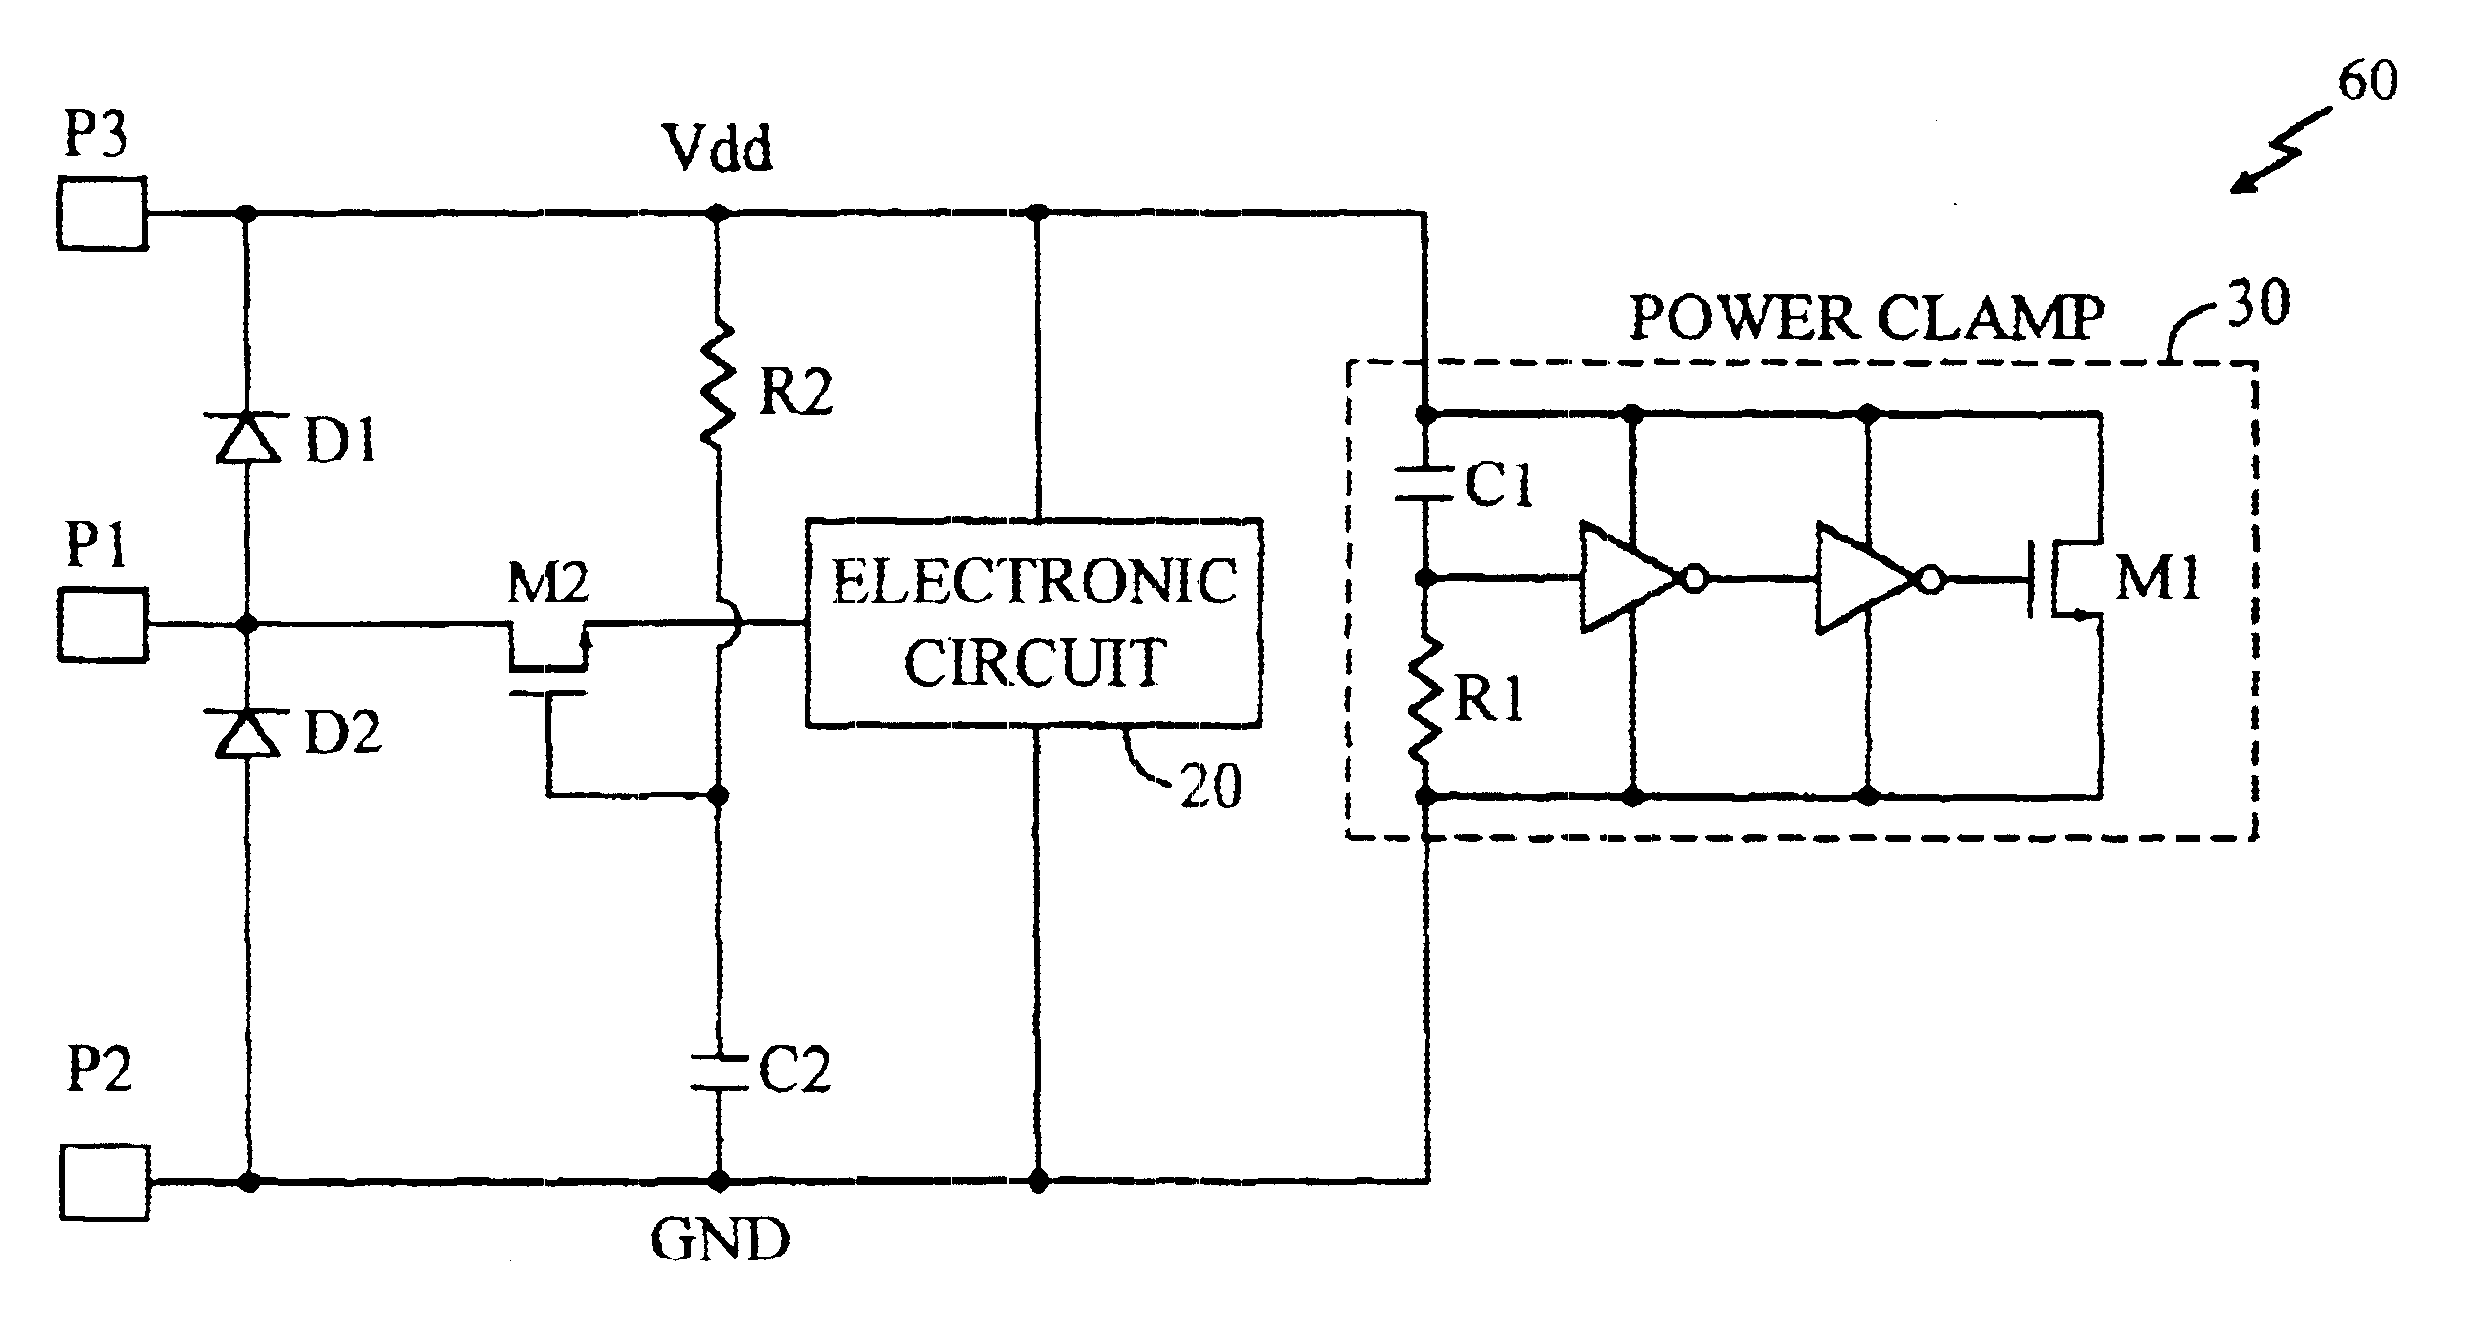 Electro-static discharge protection circuit